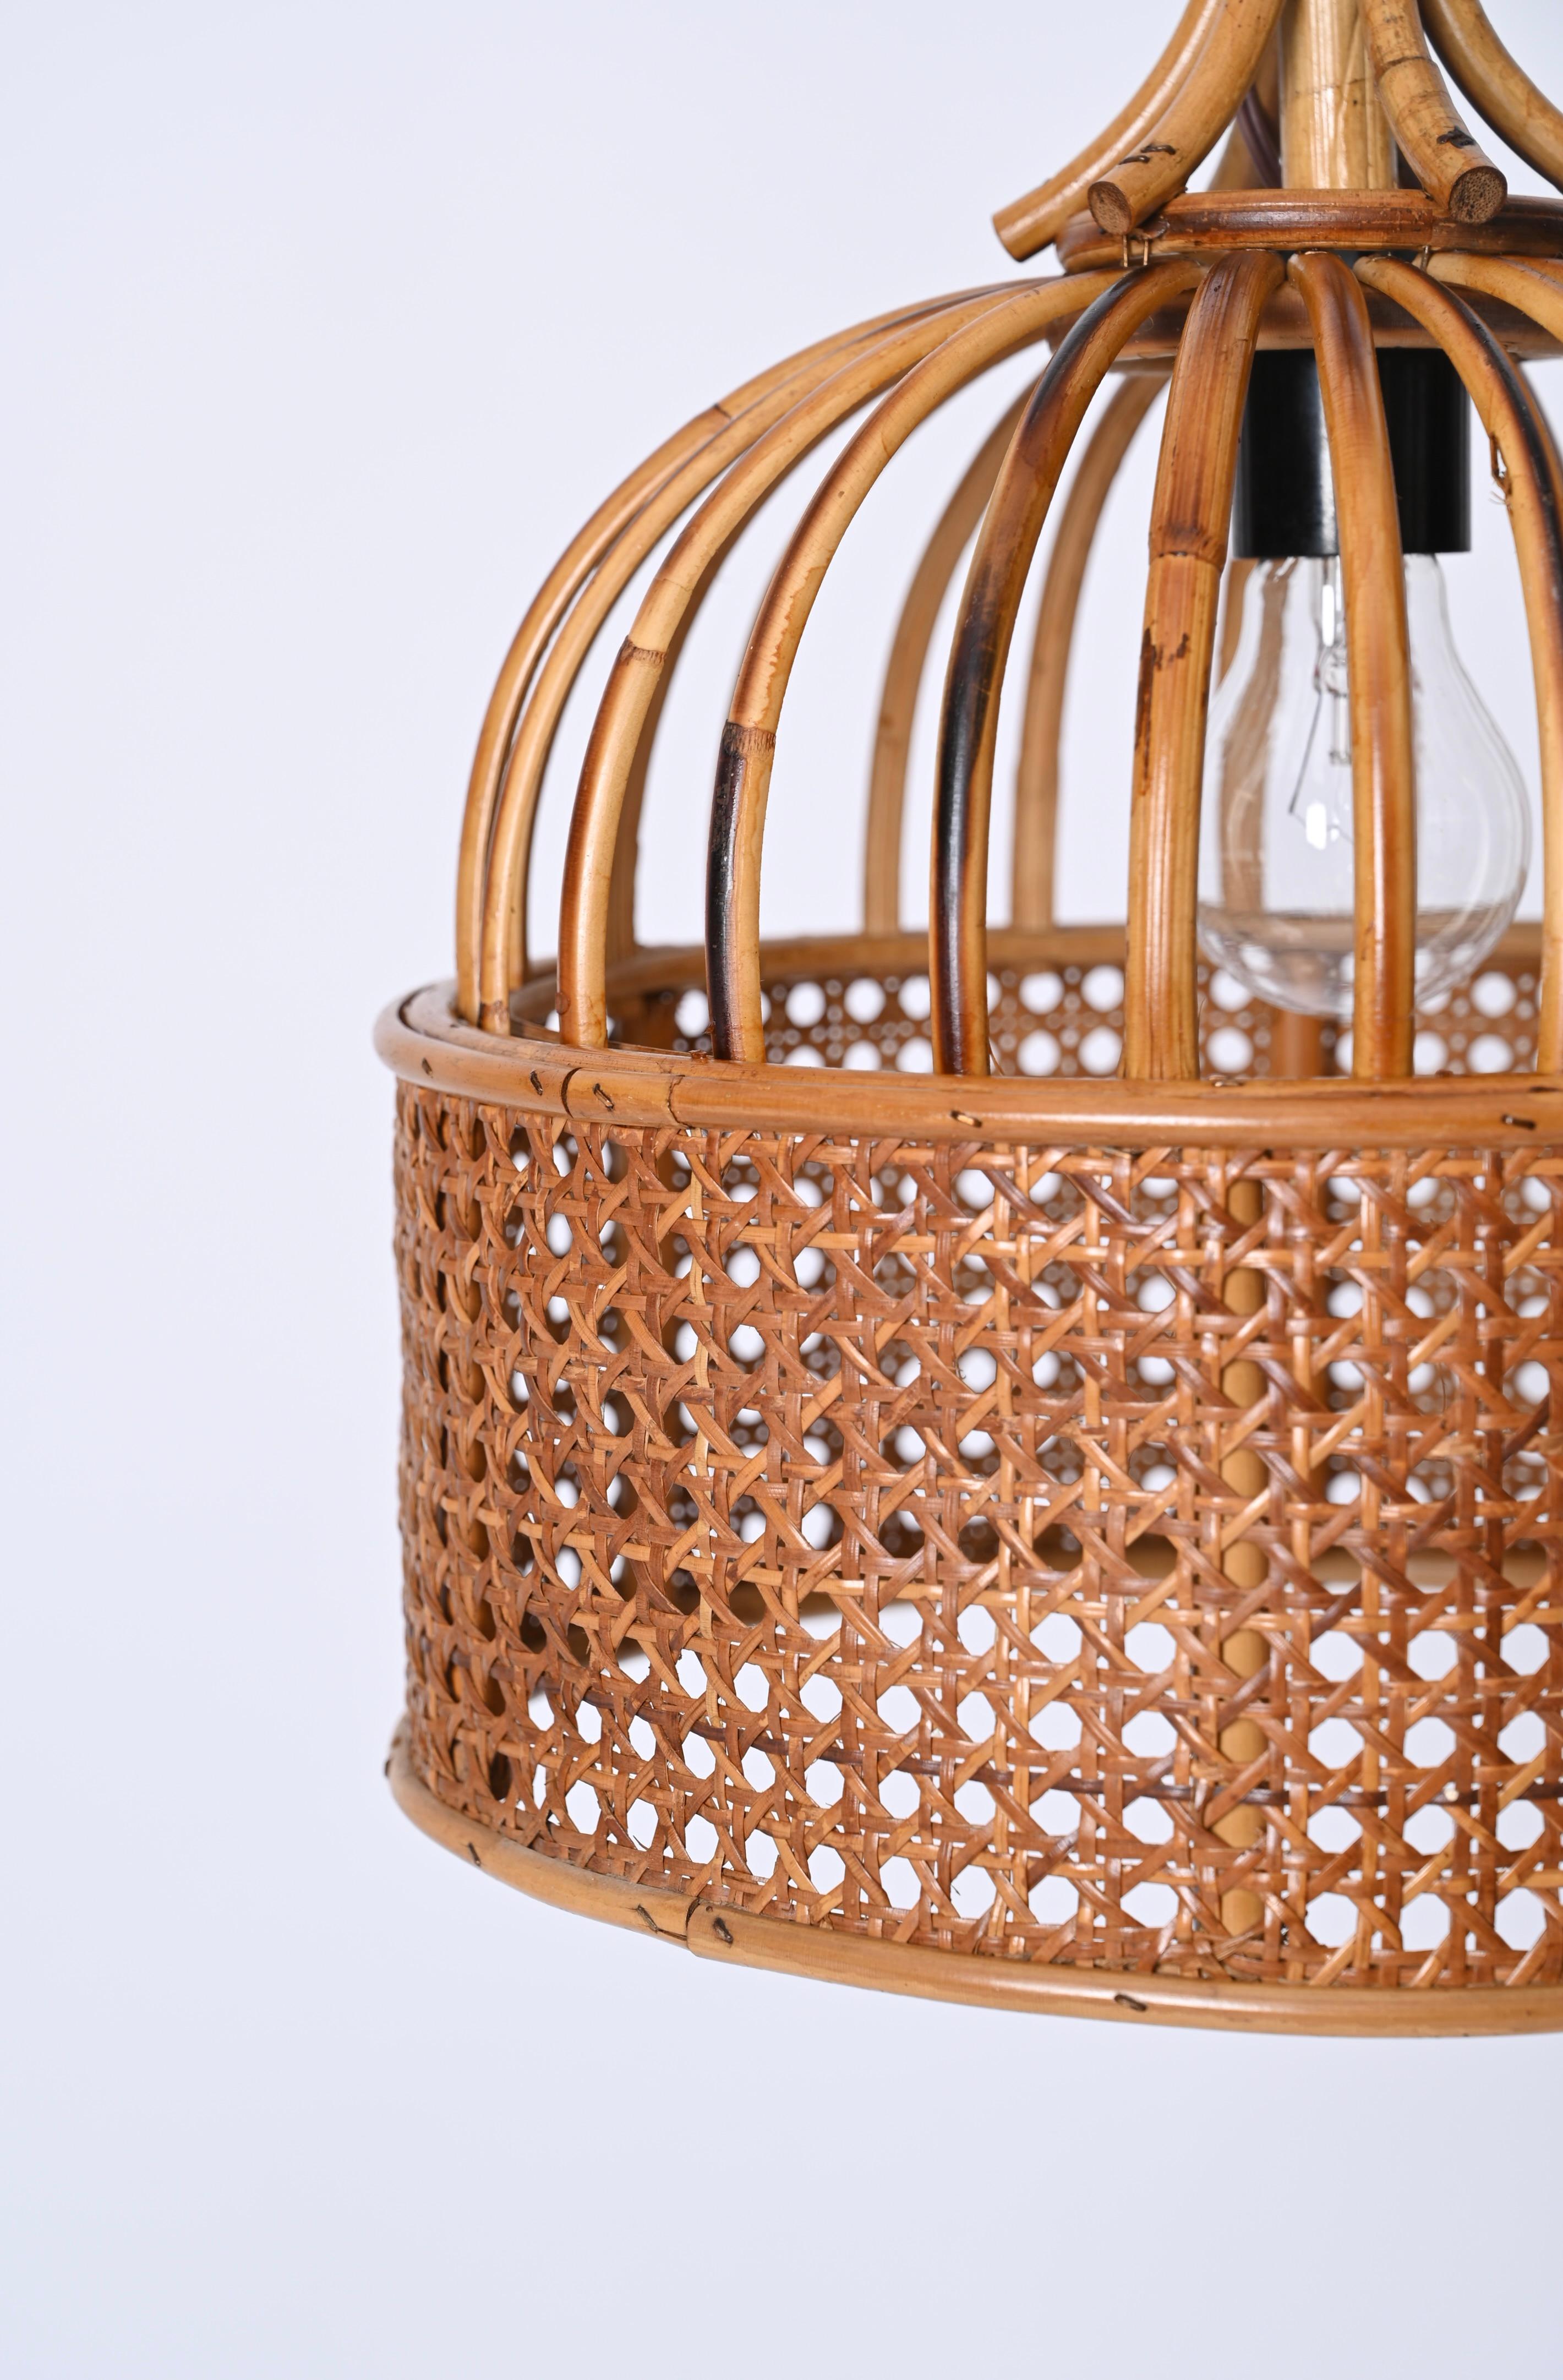 Midcentury French Riviera Round Pendant in Rattan and Wicker, Italy 1970s For Sale 1